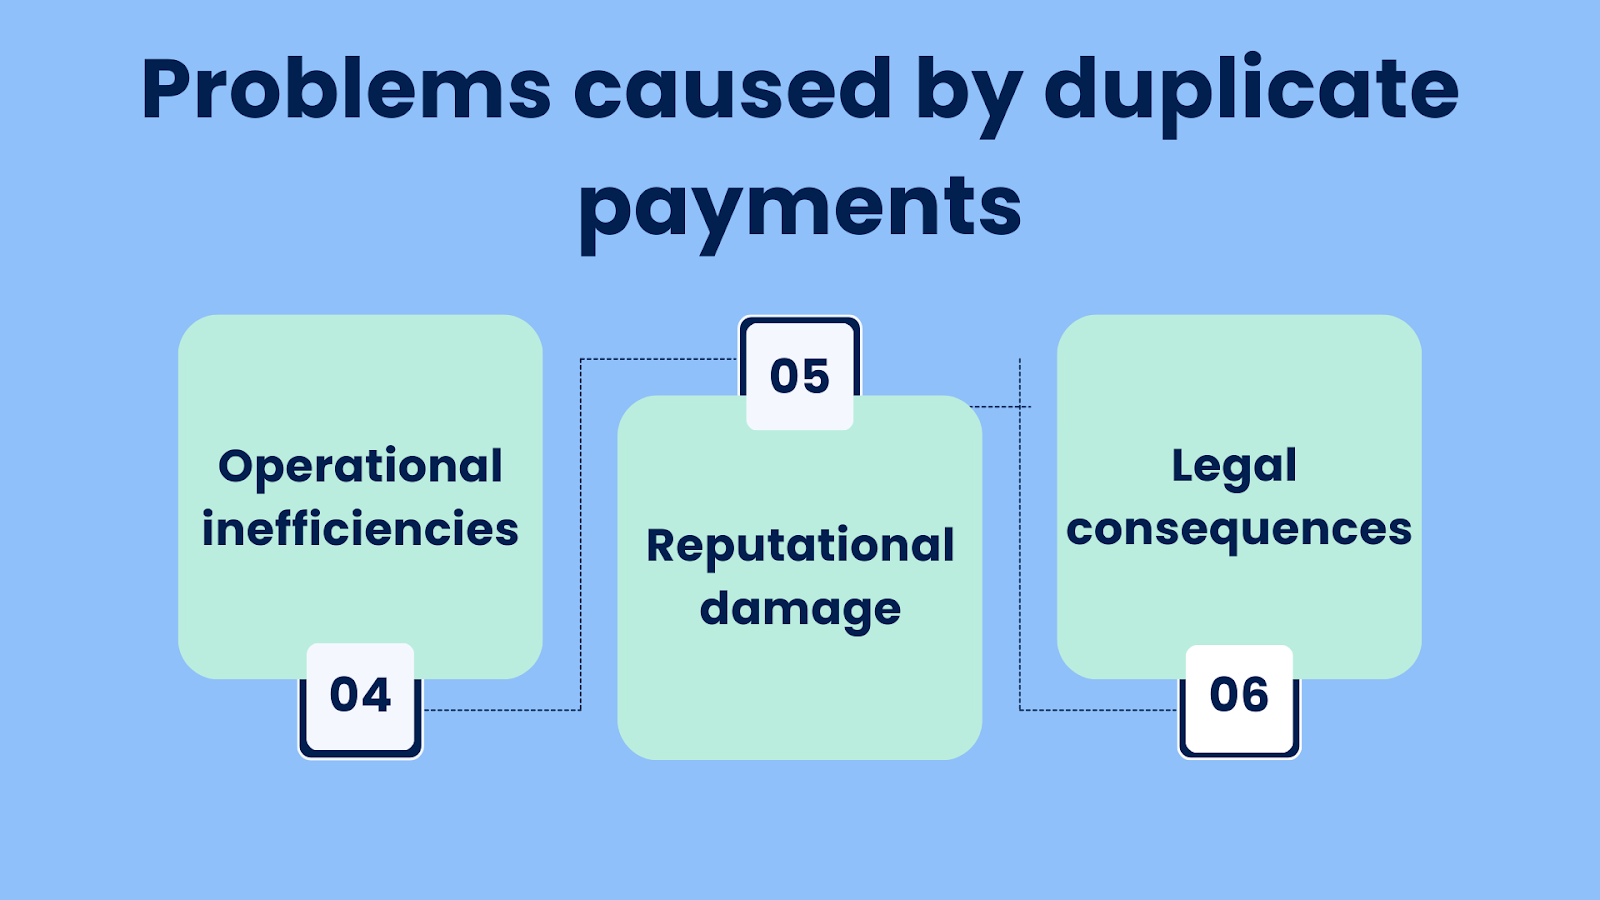 Problems caused by duplicate payments. Part 2